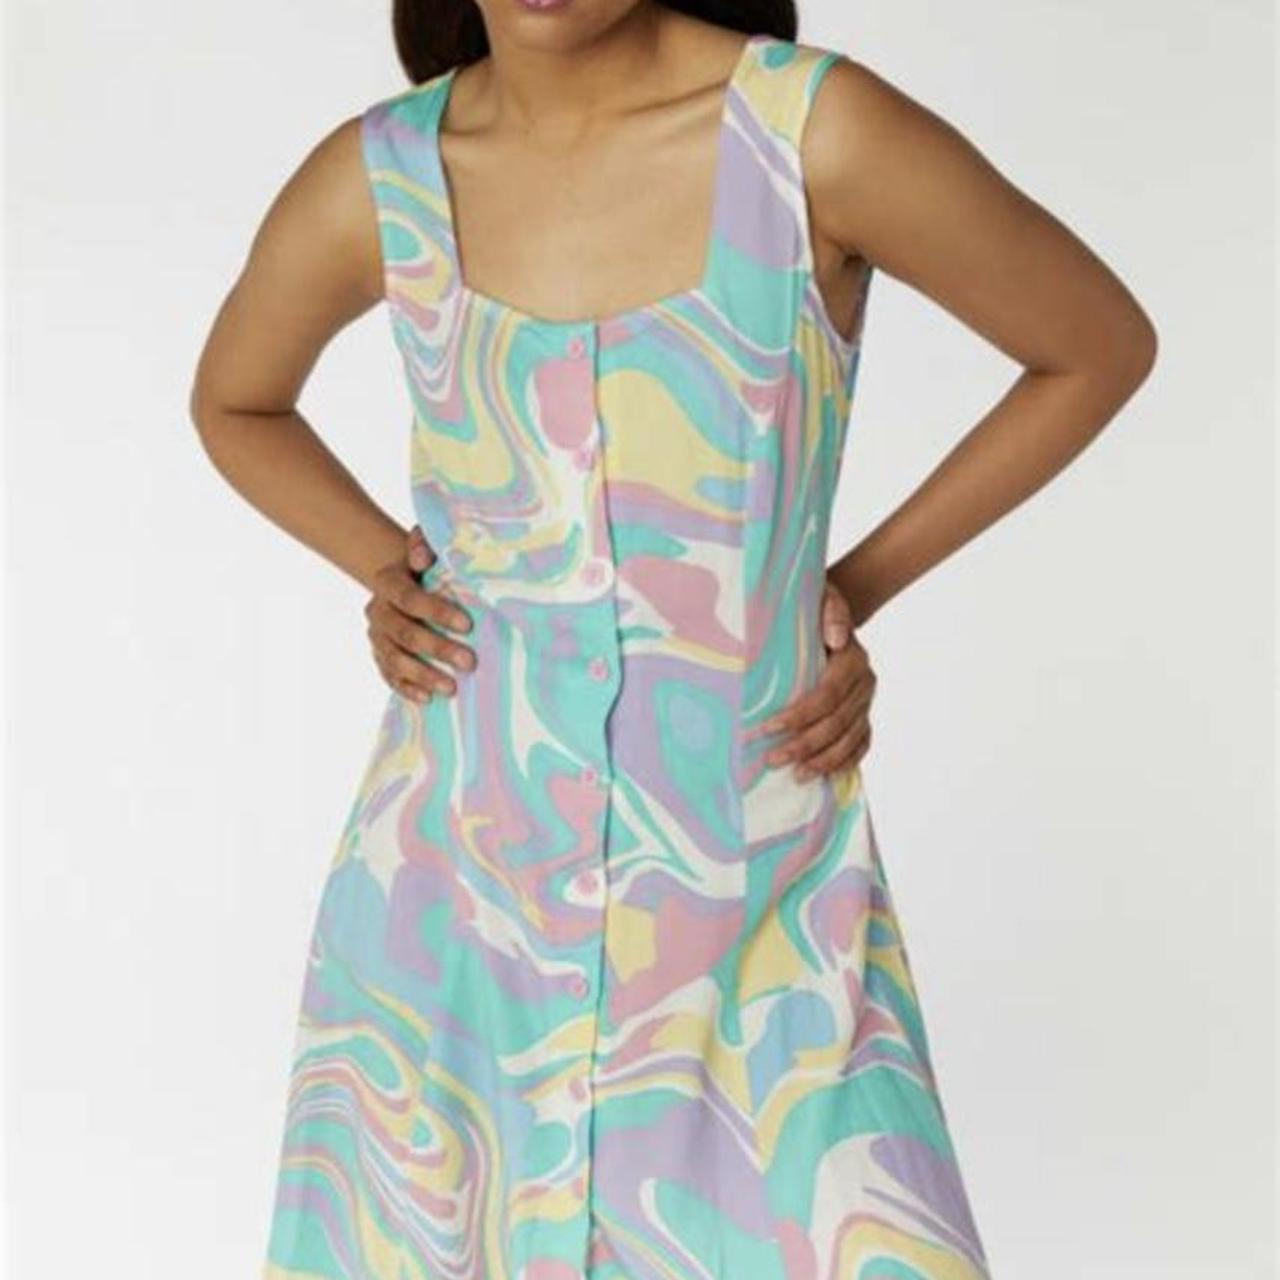 Product Image 4 - Psychedelically pastel 80's style dress